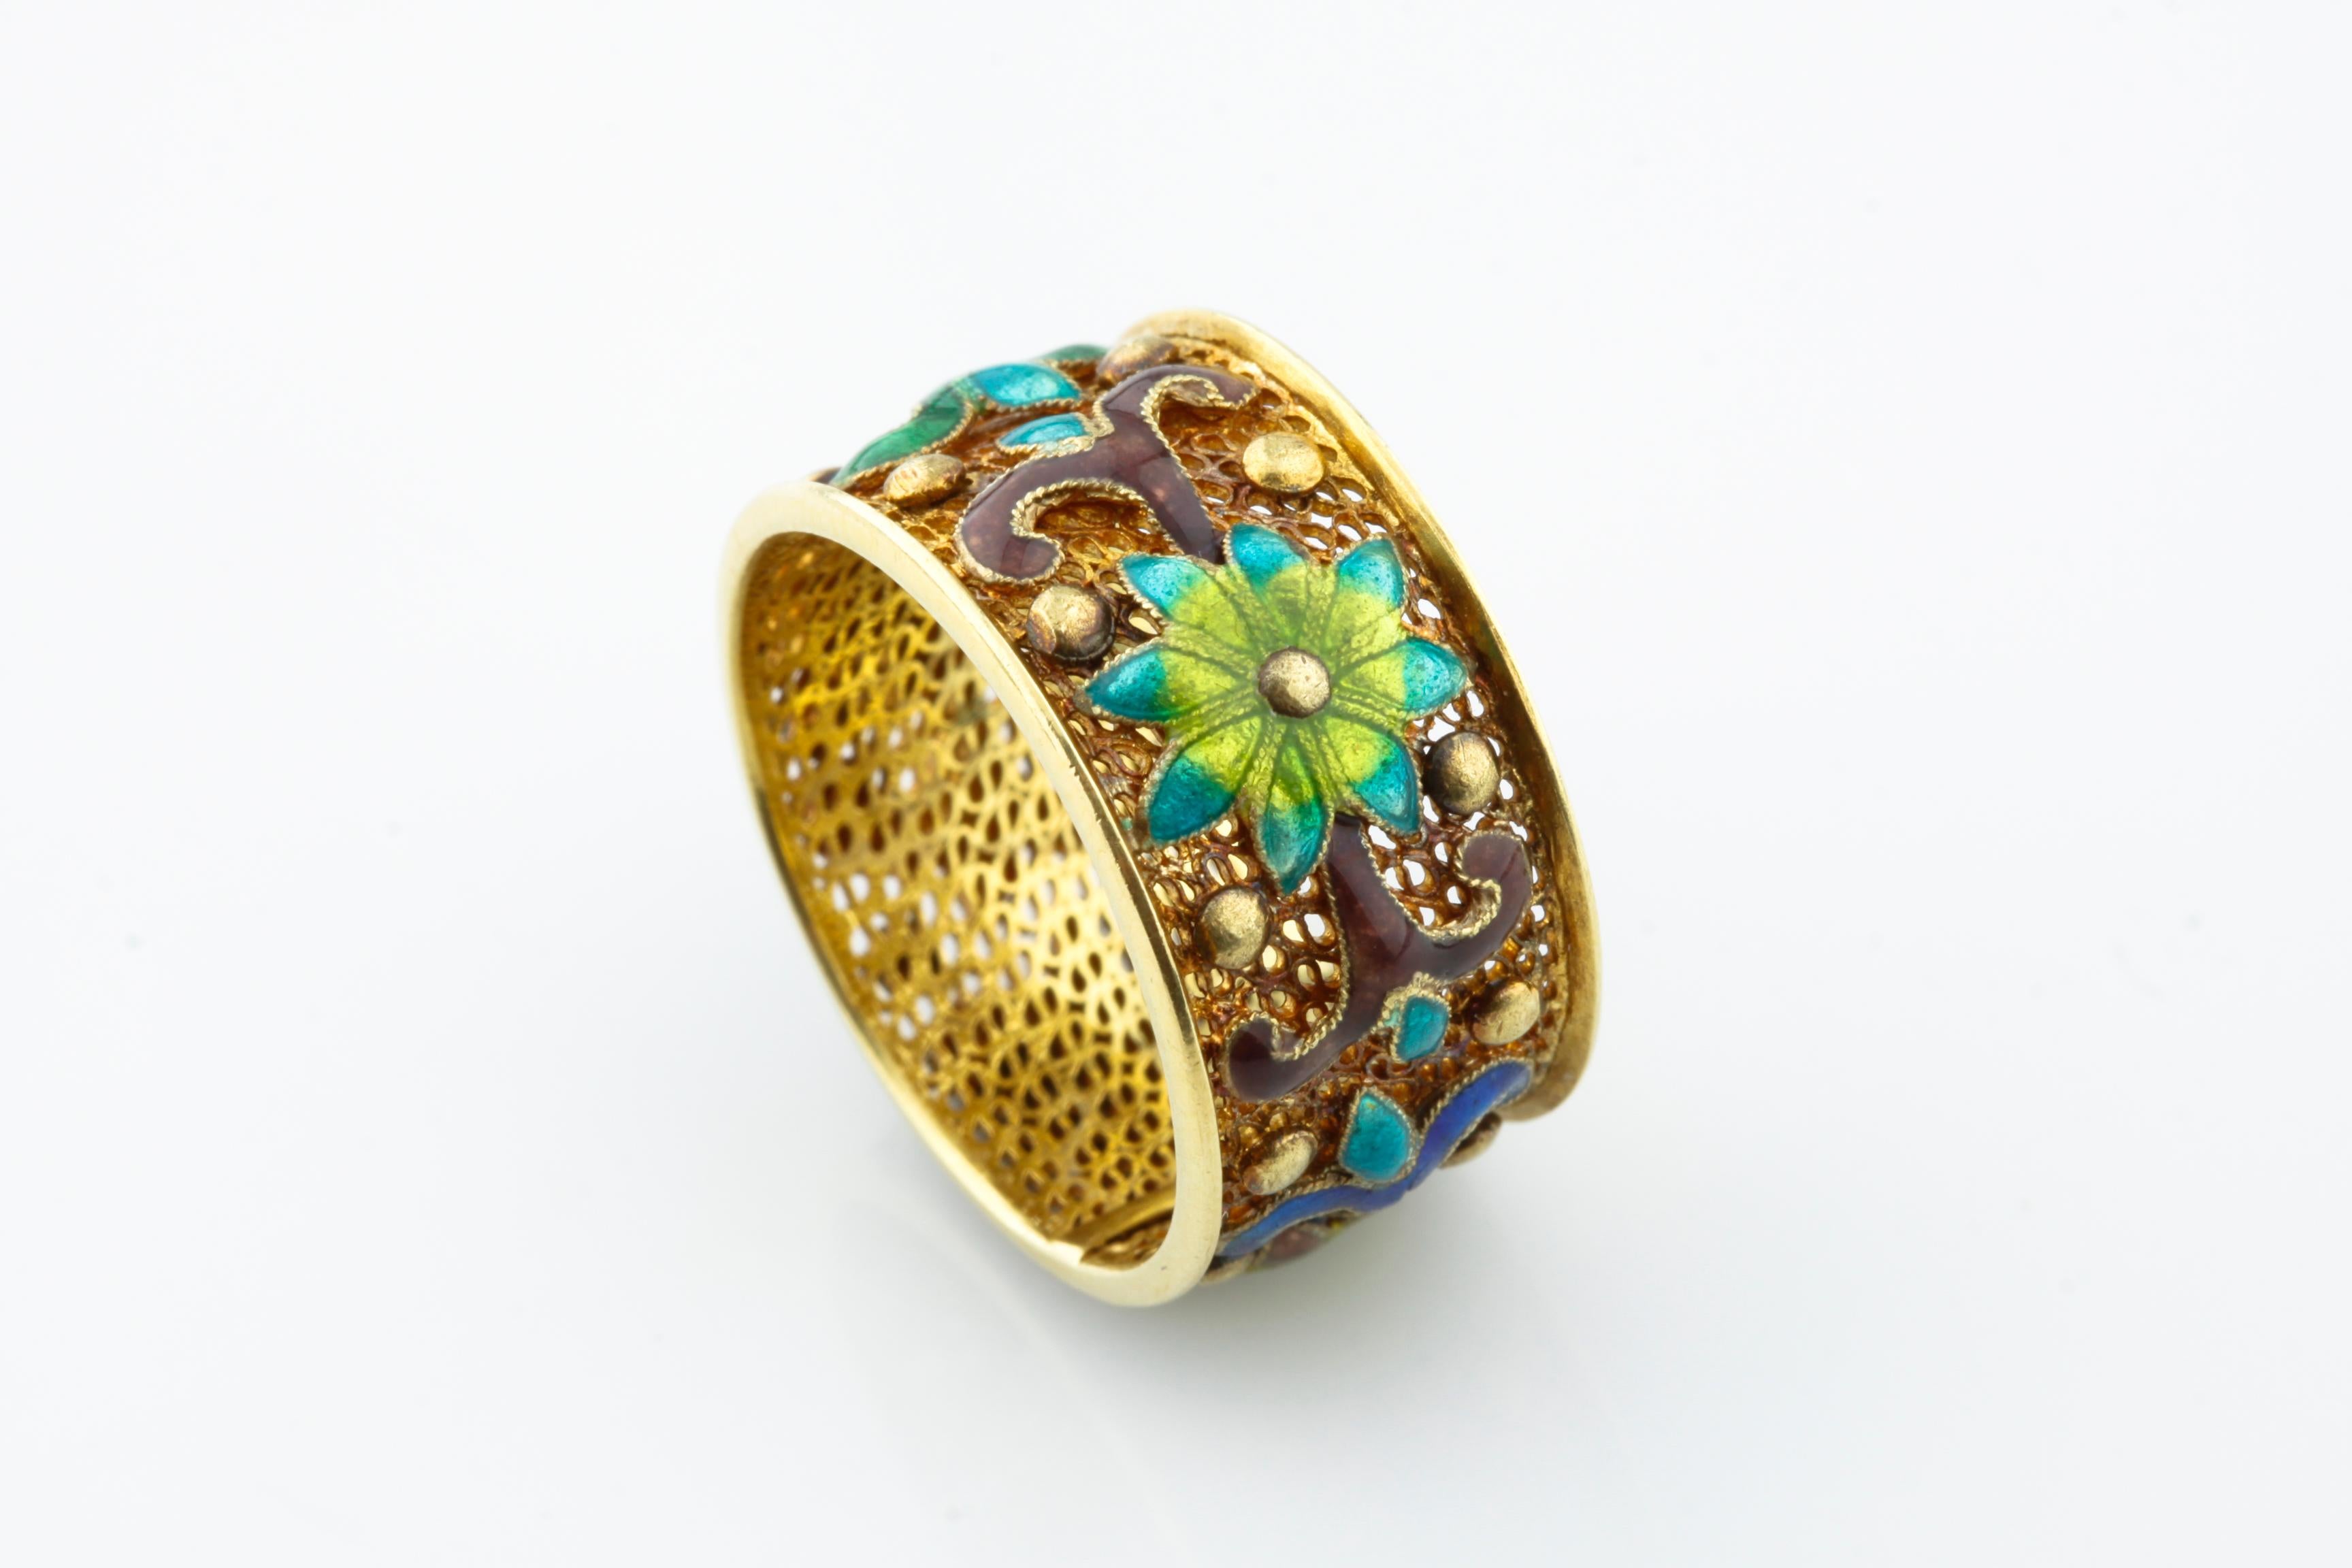 Beautiufl Mesh Band Ring
14k Yellow Gold
Features Exquisite Enamel Detailing
Size 6
10 mm Wide
Total Mass = 4.7 grams